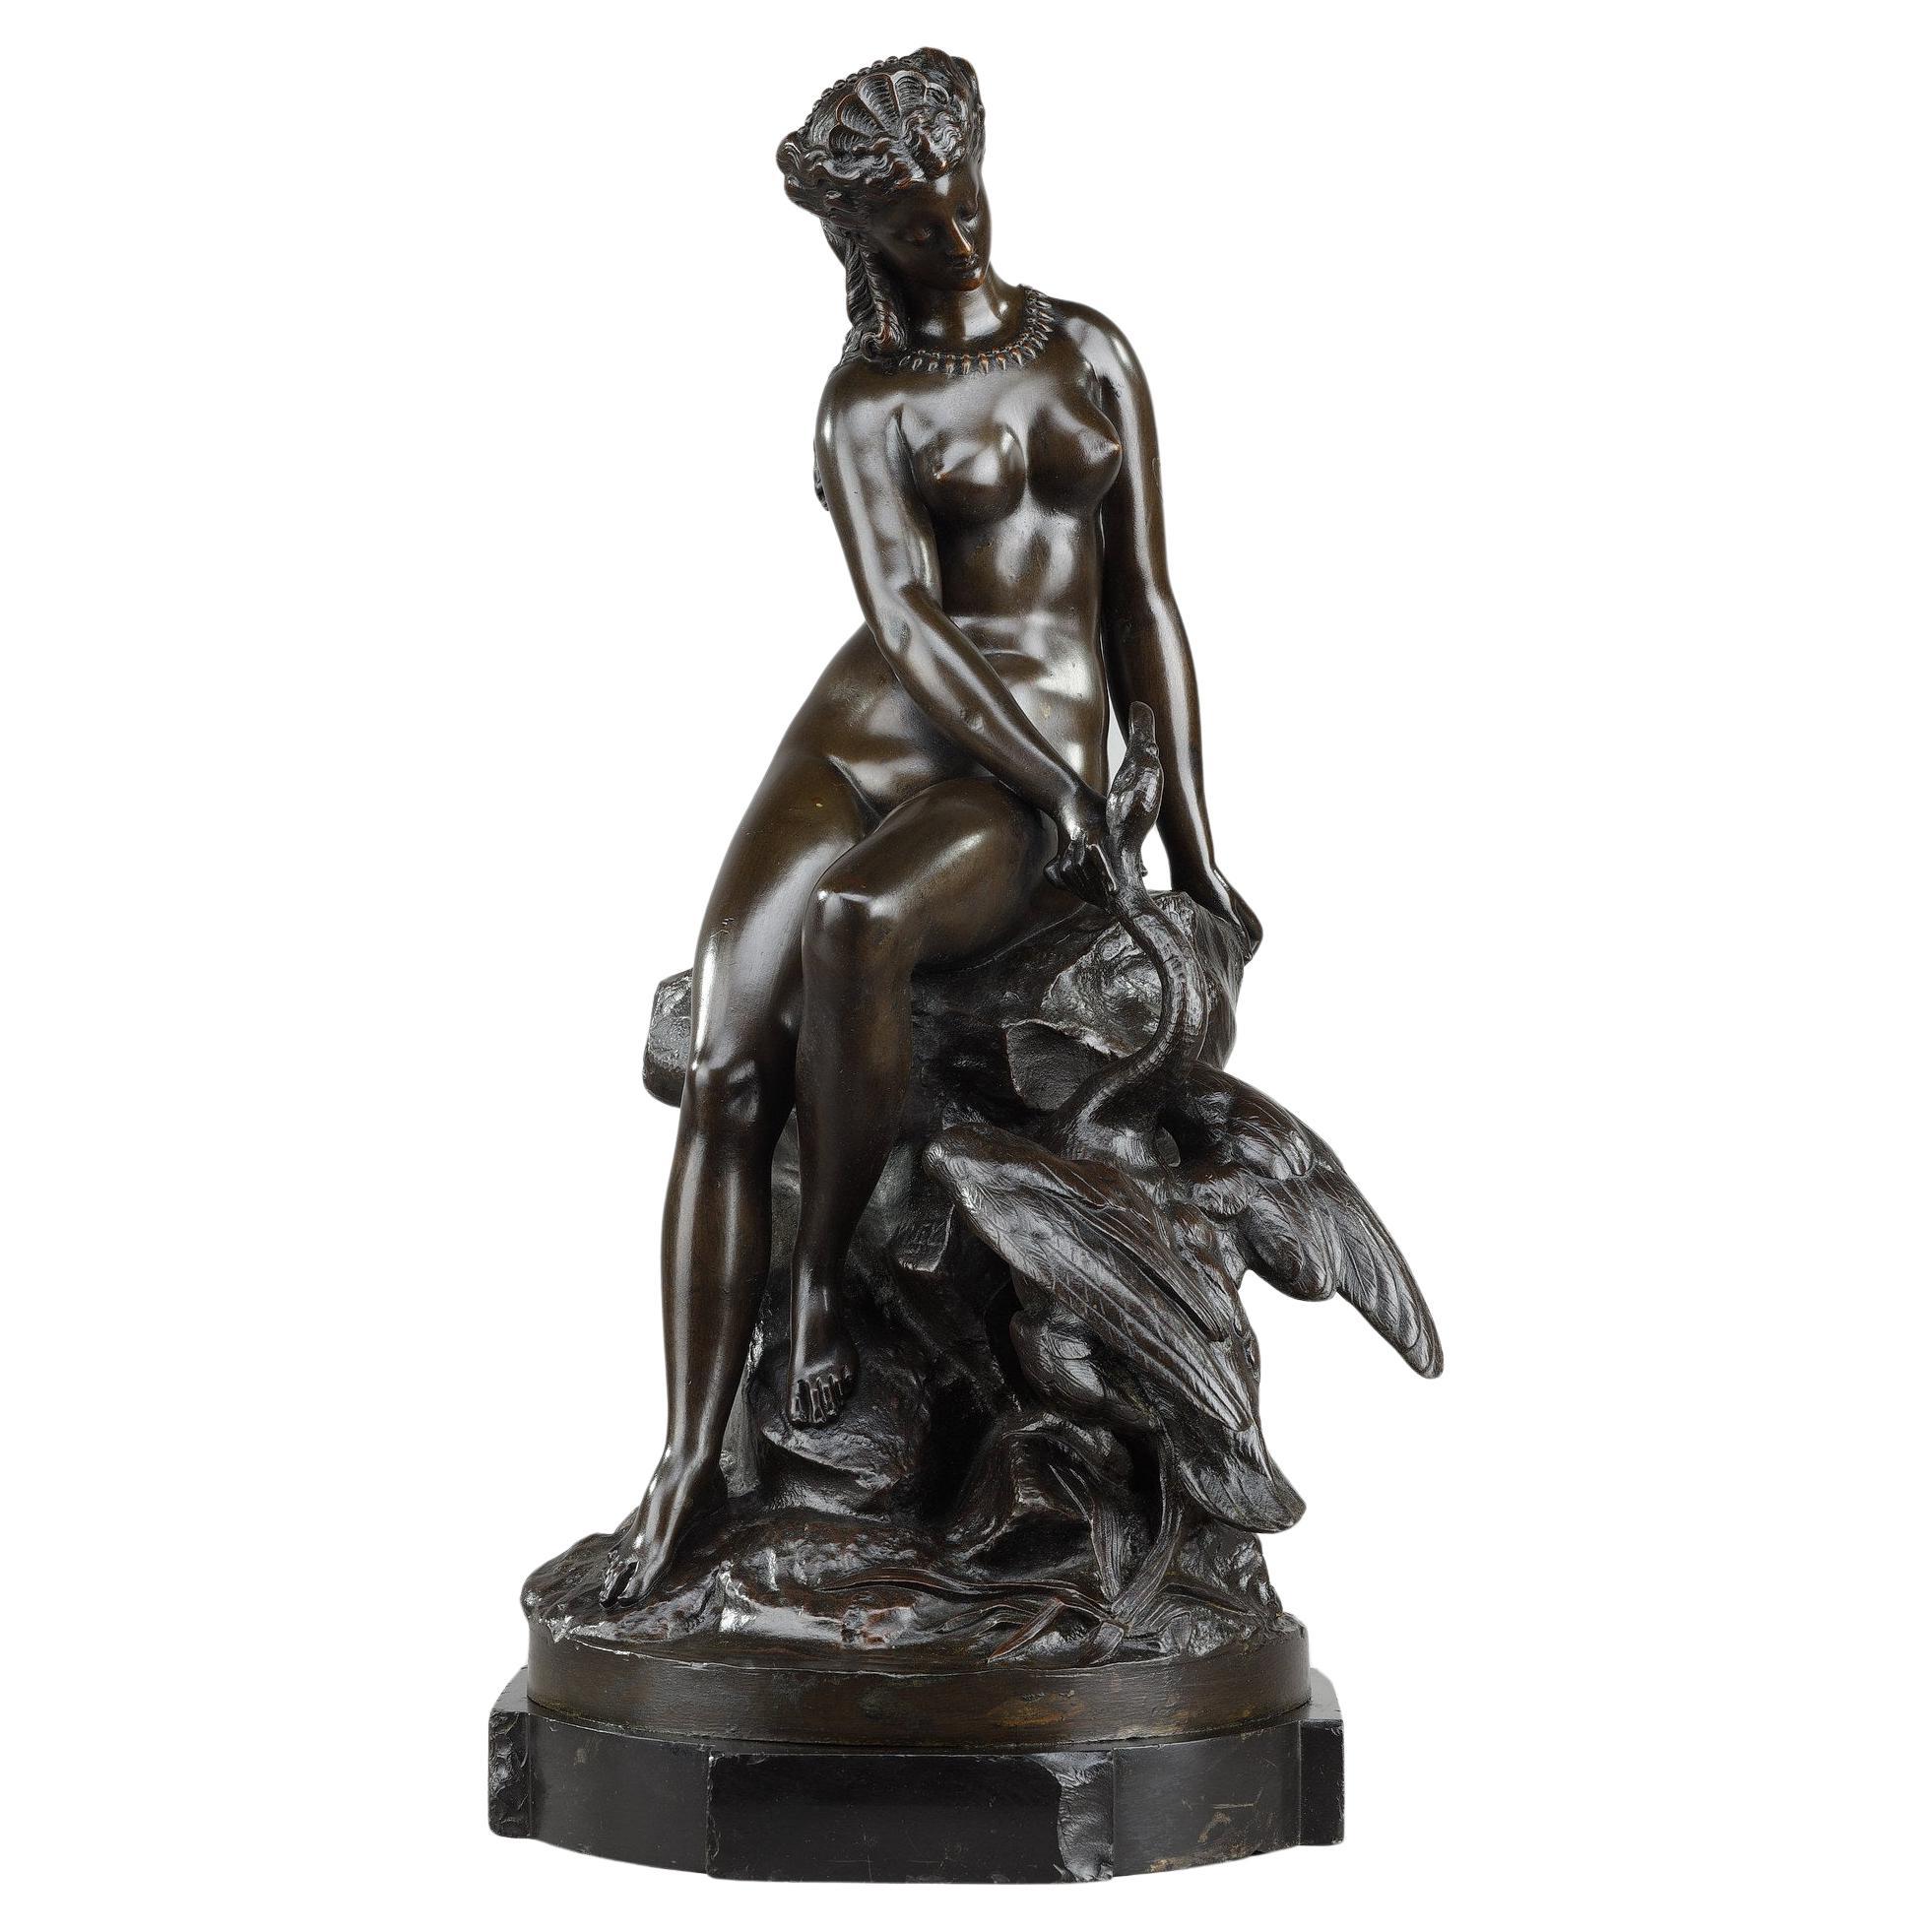 Bronze sculpture "Leda and the Swan" by Louis Kley